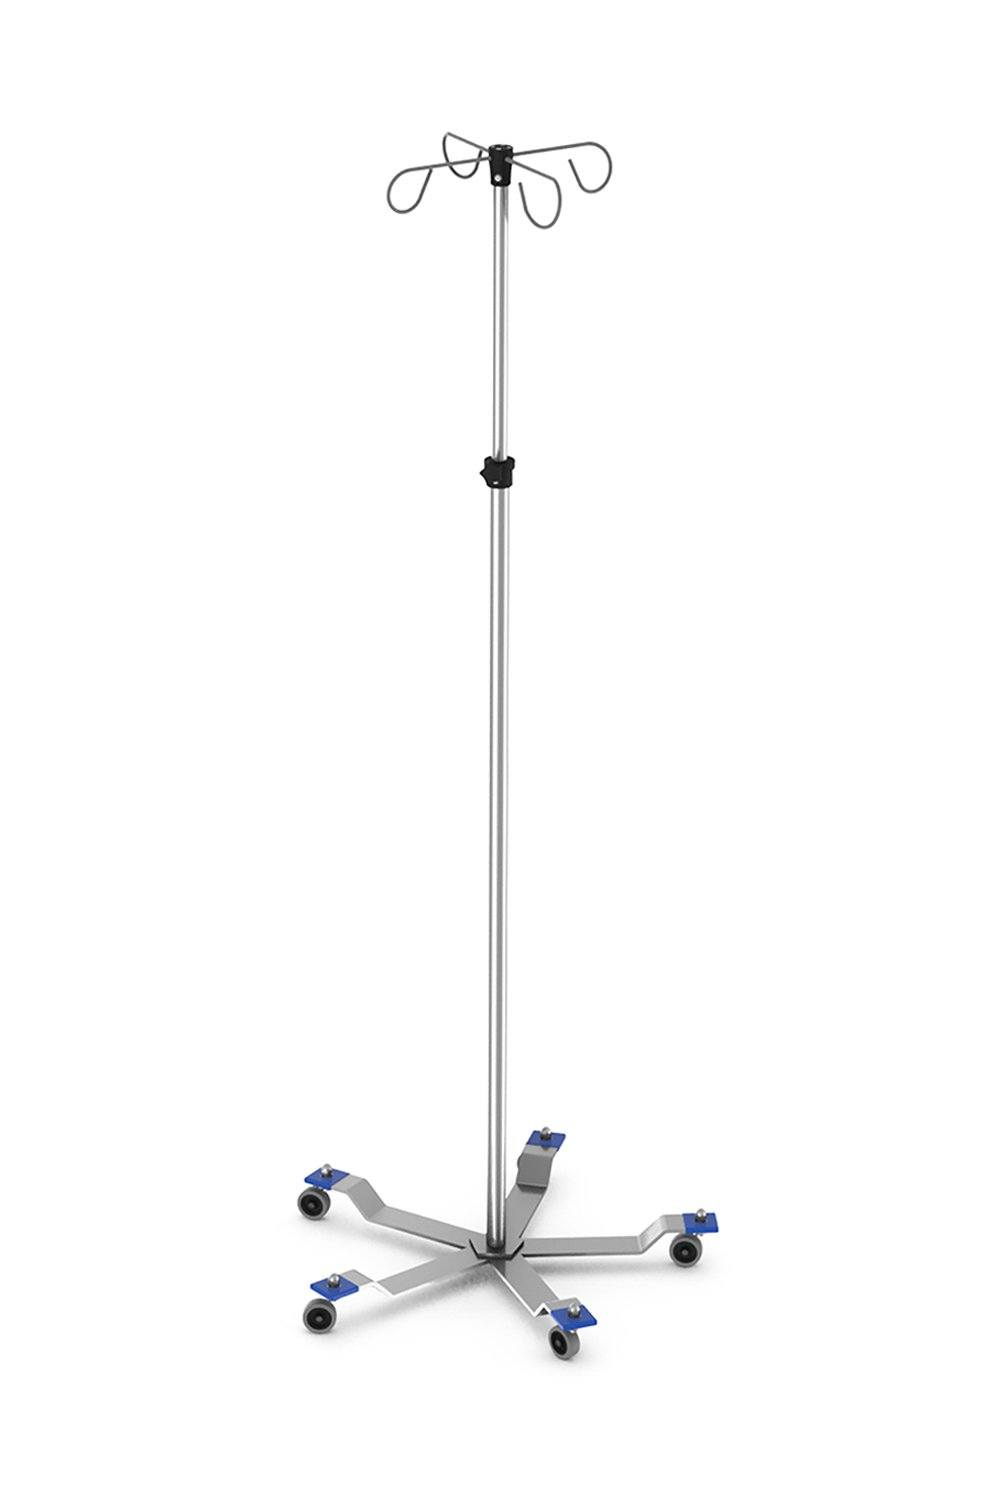 IV Stand Stainless Solutions Macmedical Hand Operated Stainless Steel , knocked down 5-legs, 4-hooks